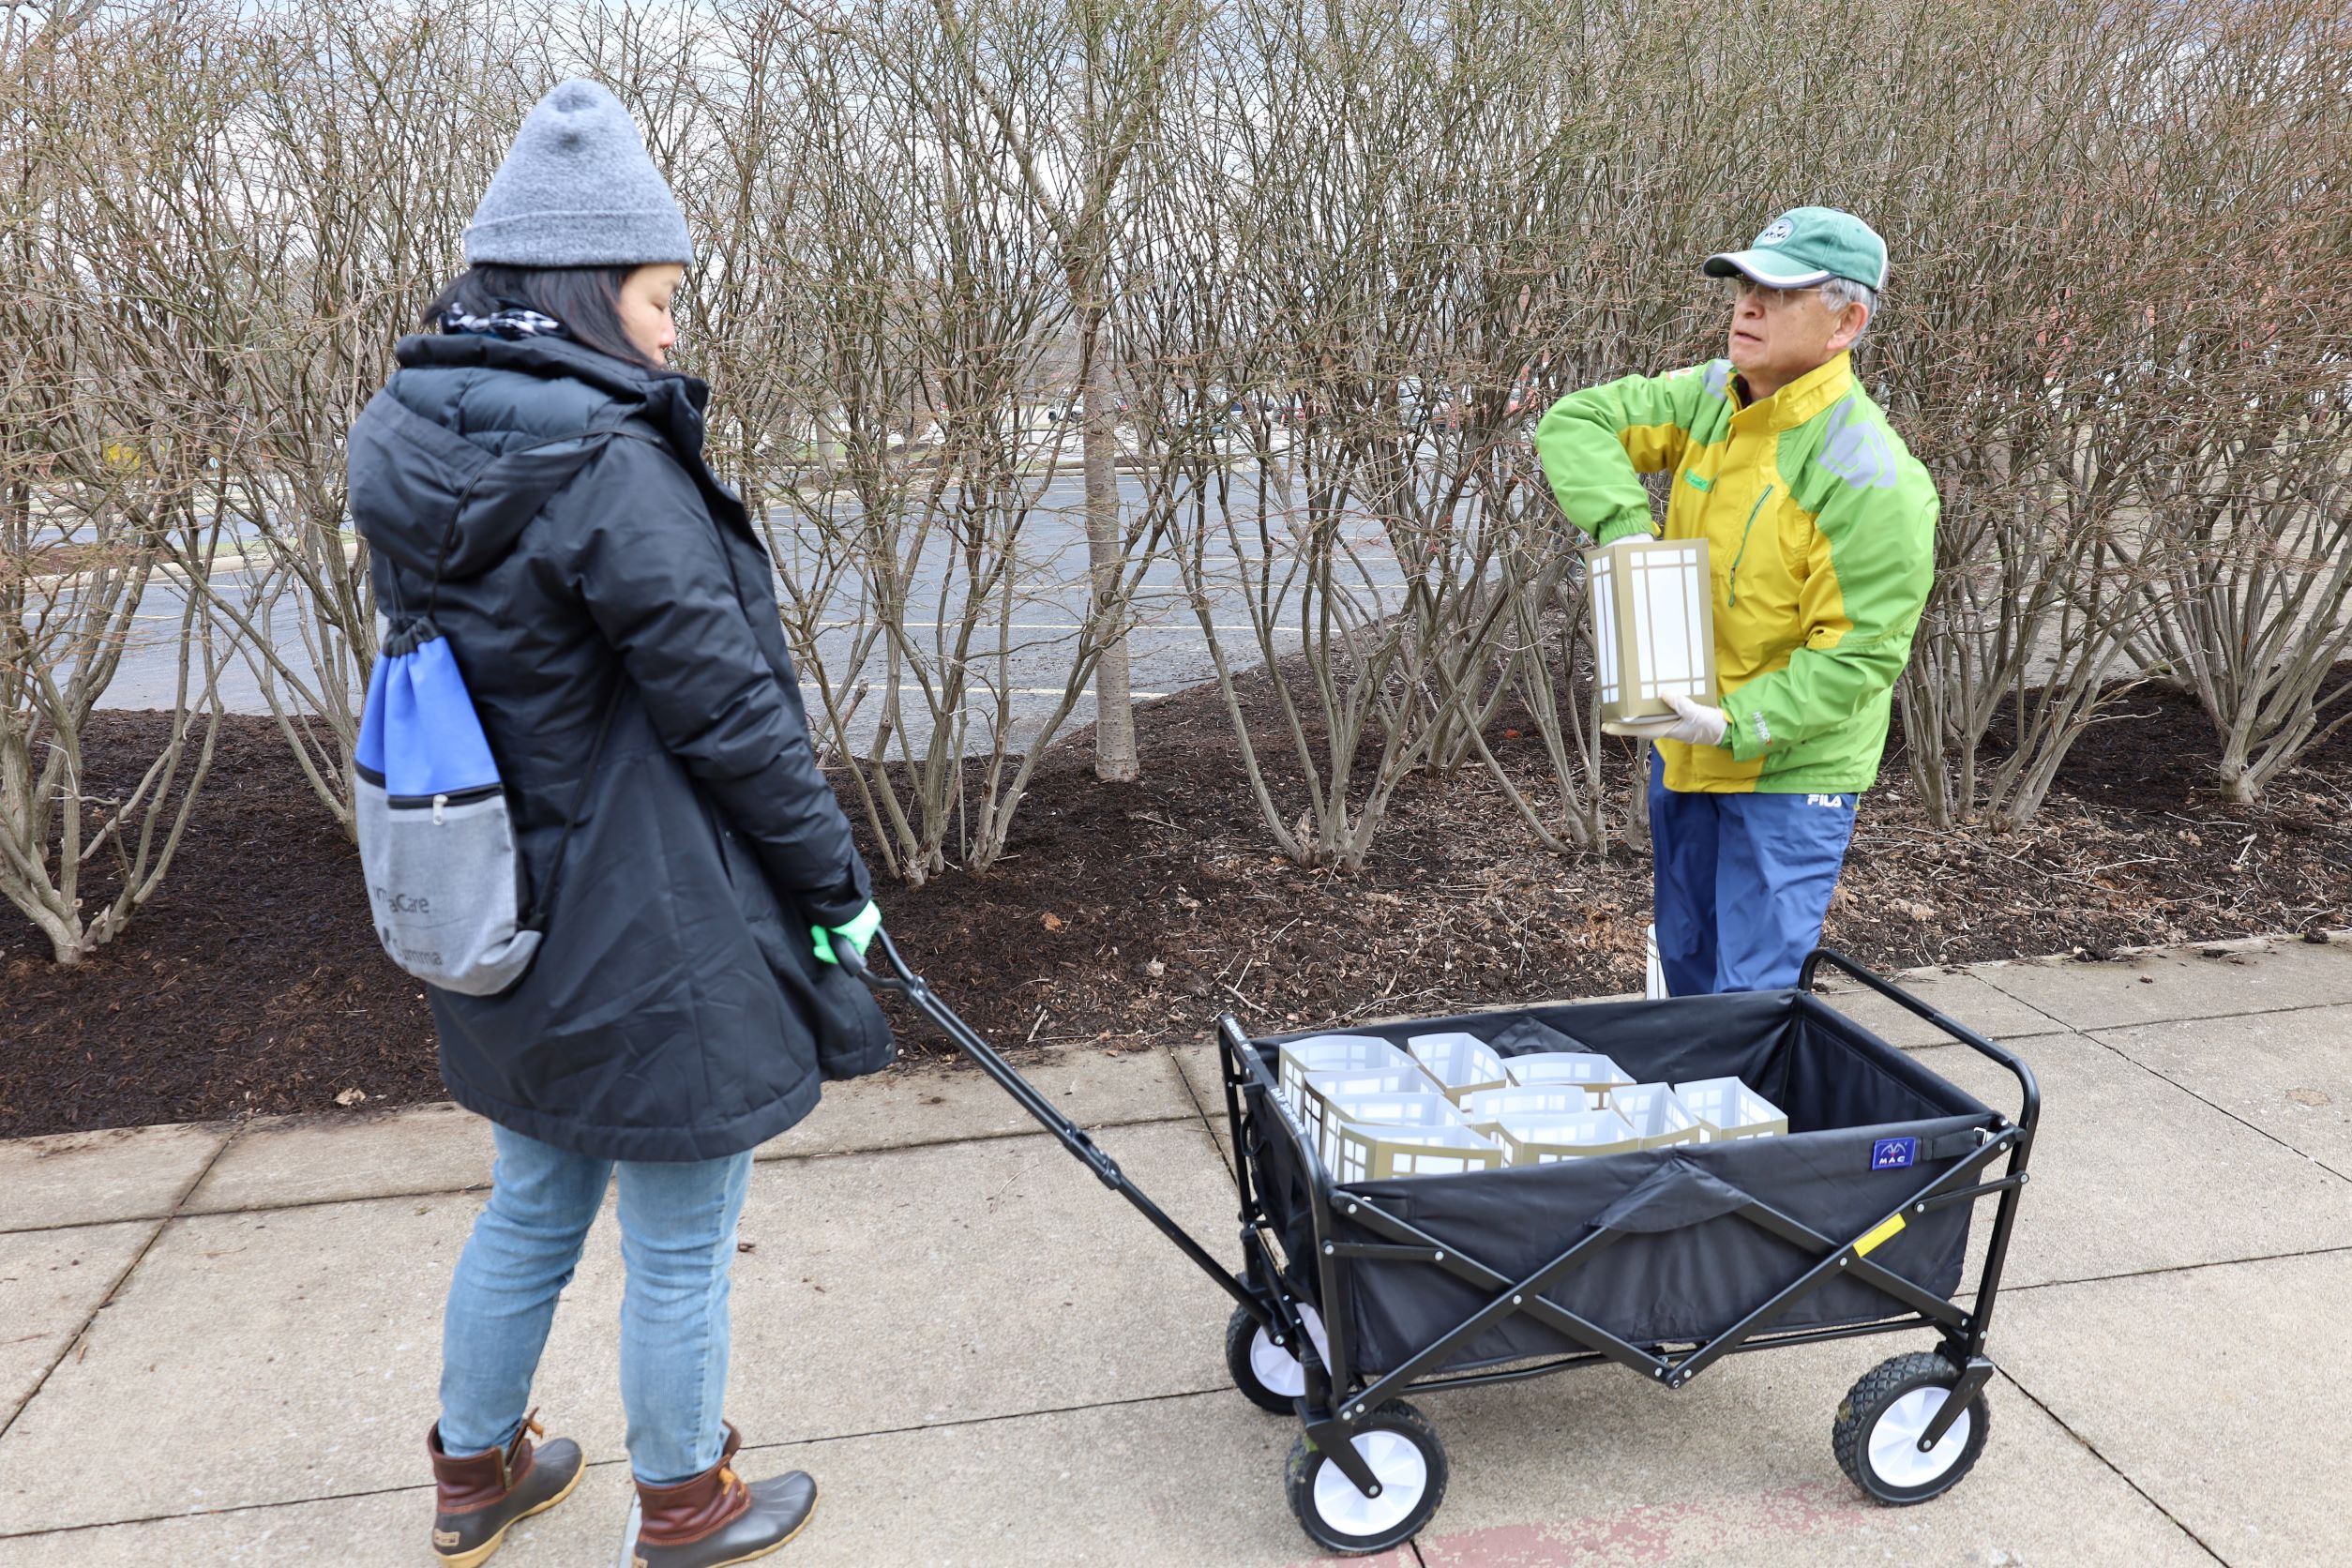 Two volunteers in coats and hats pulling a wagon full of luminaries along a concrete path